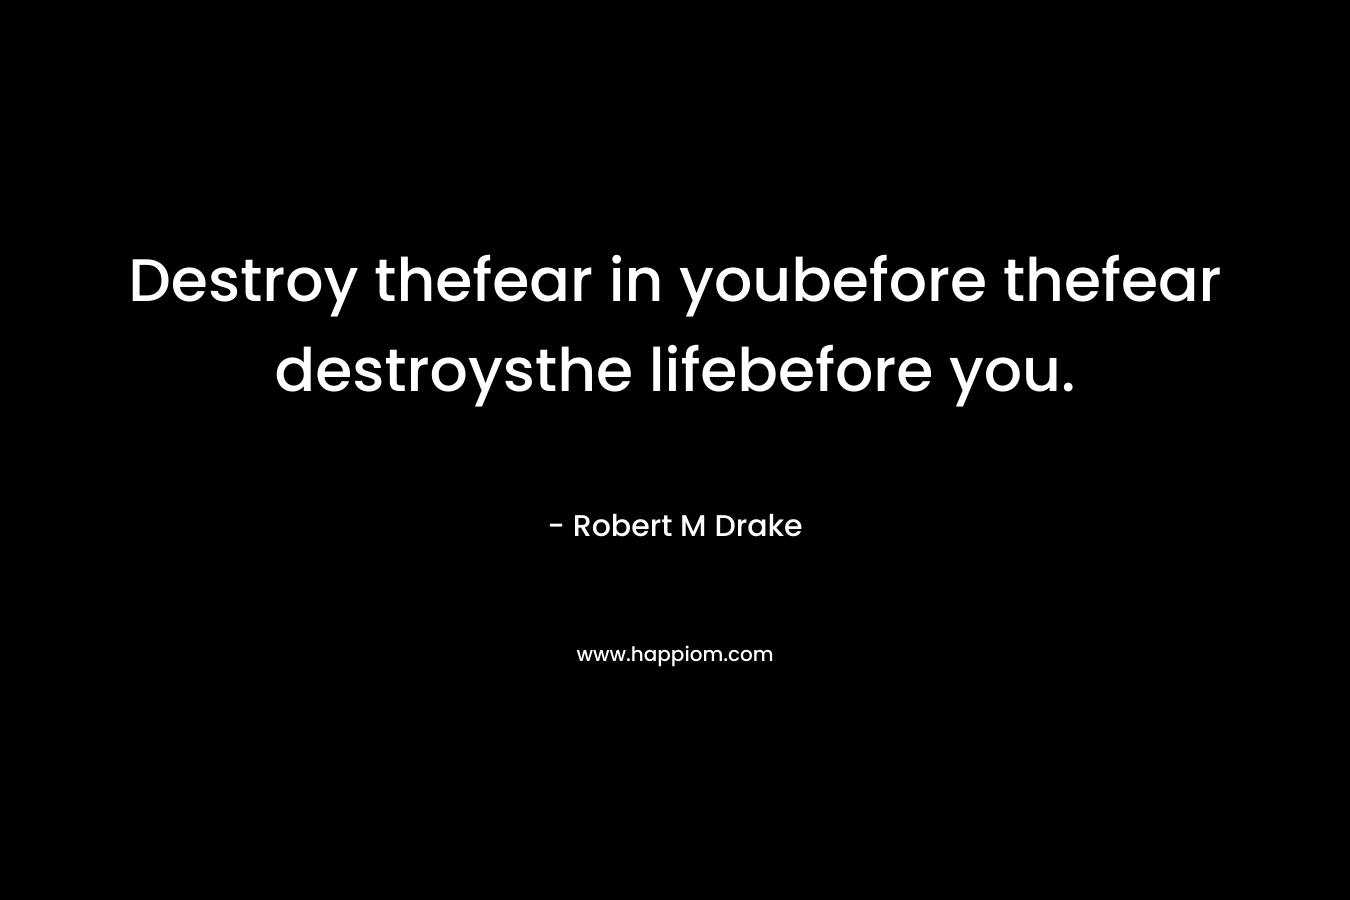 Destroy thefear in youbefore thefear destroysthe lifebefore you. – Robert M Drake